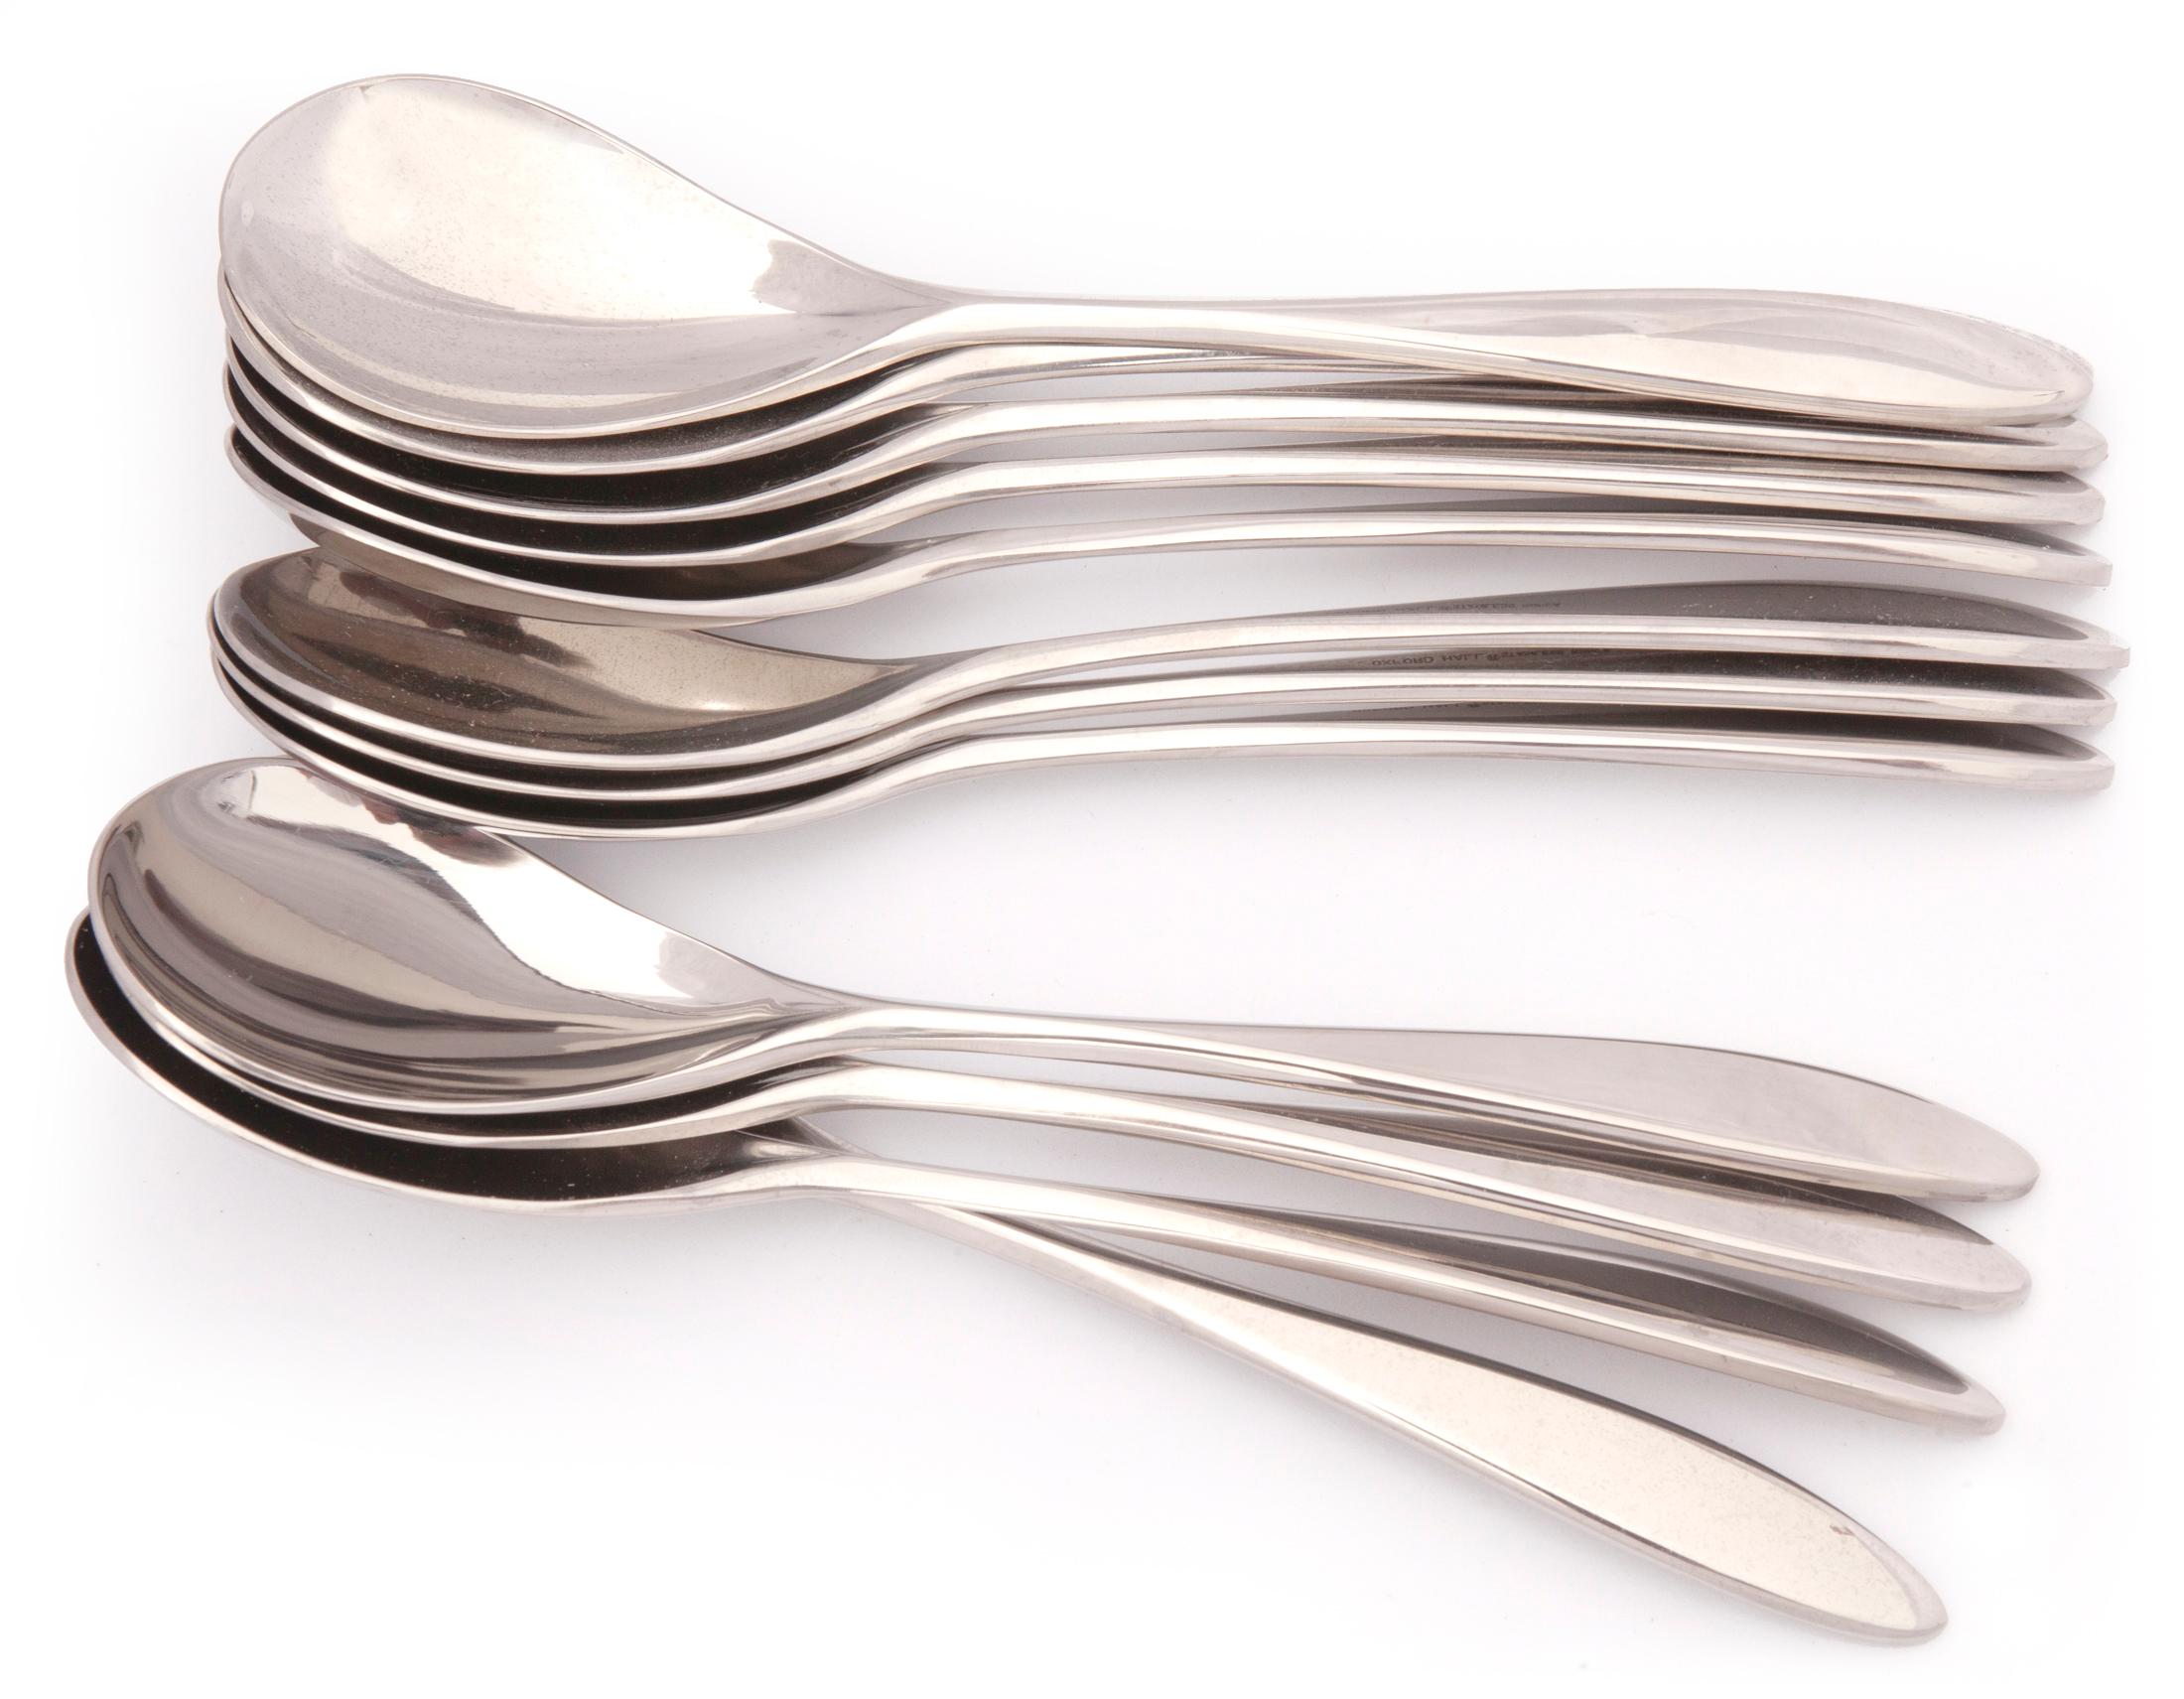 60 piece set of contemporary stainless flatware in a modern pattern.
Sizes are listed below for review:
Large Spoons 8LX1.75WX1D
Small Spoons 6.35LX1.25WX1.25H
Large Forks 7.75LX1.25WX1H
Knife 8.25LX1WX.5H
Small Forks 6.25LX1WX.75H
Serving pieces,